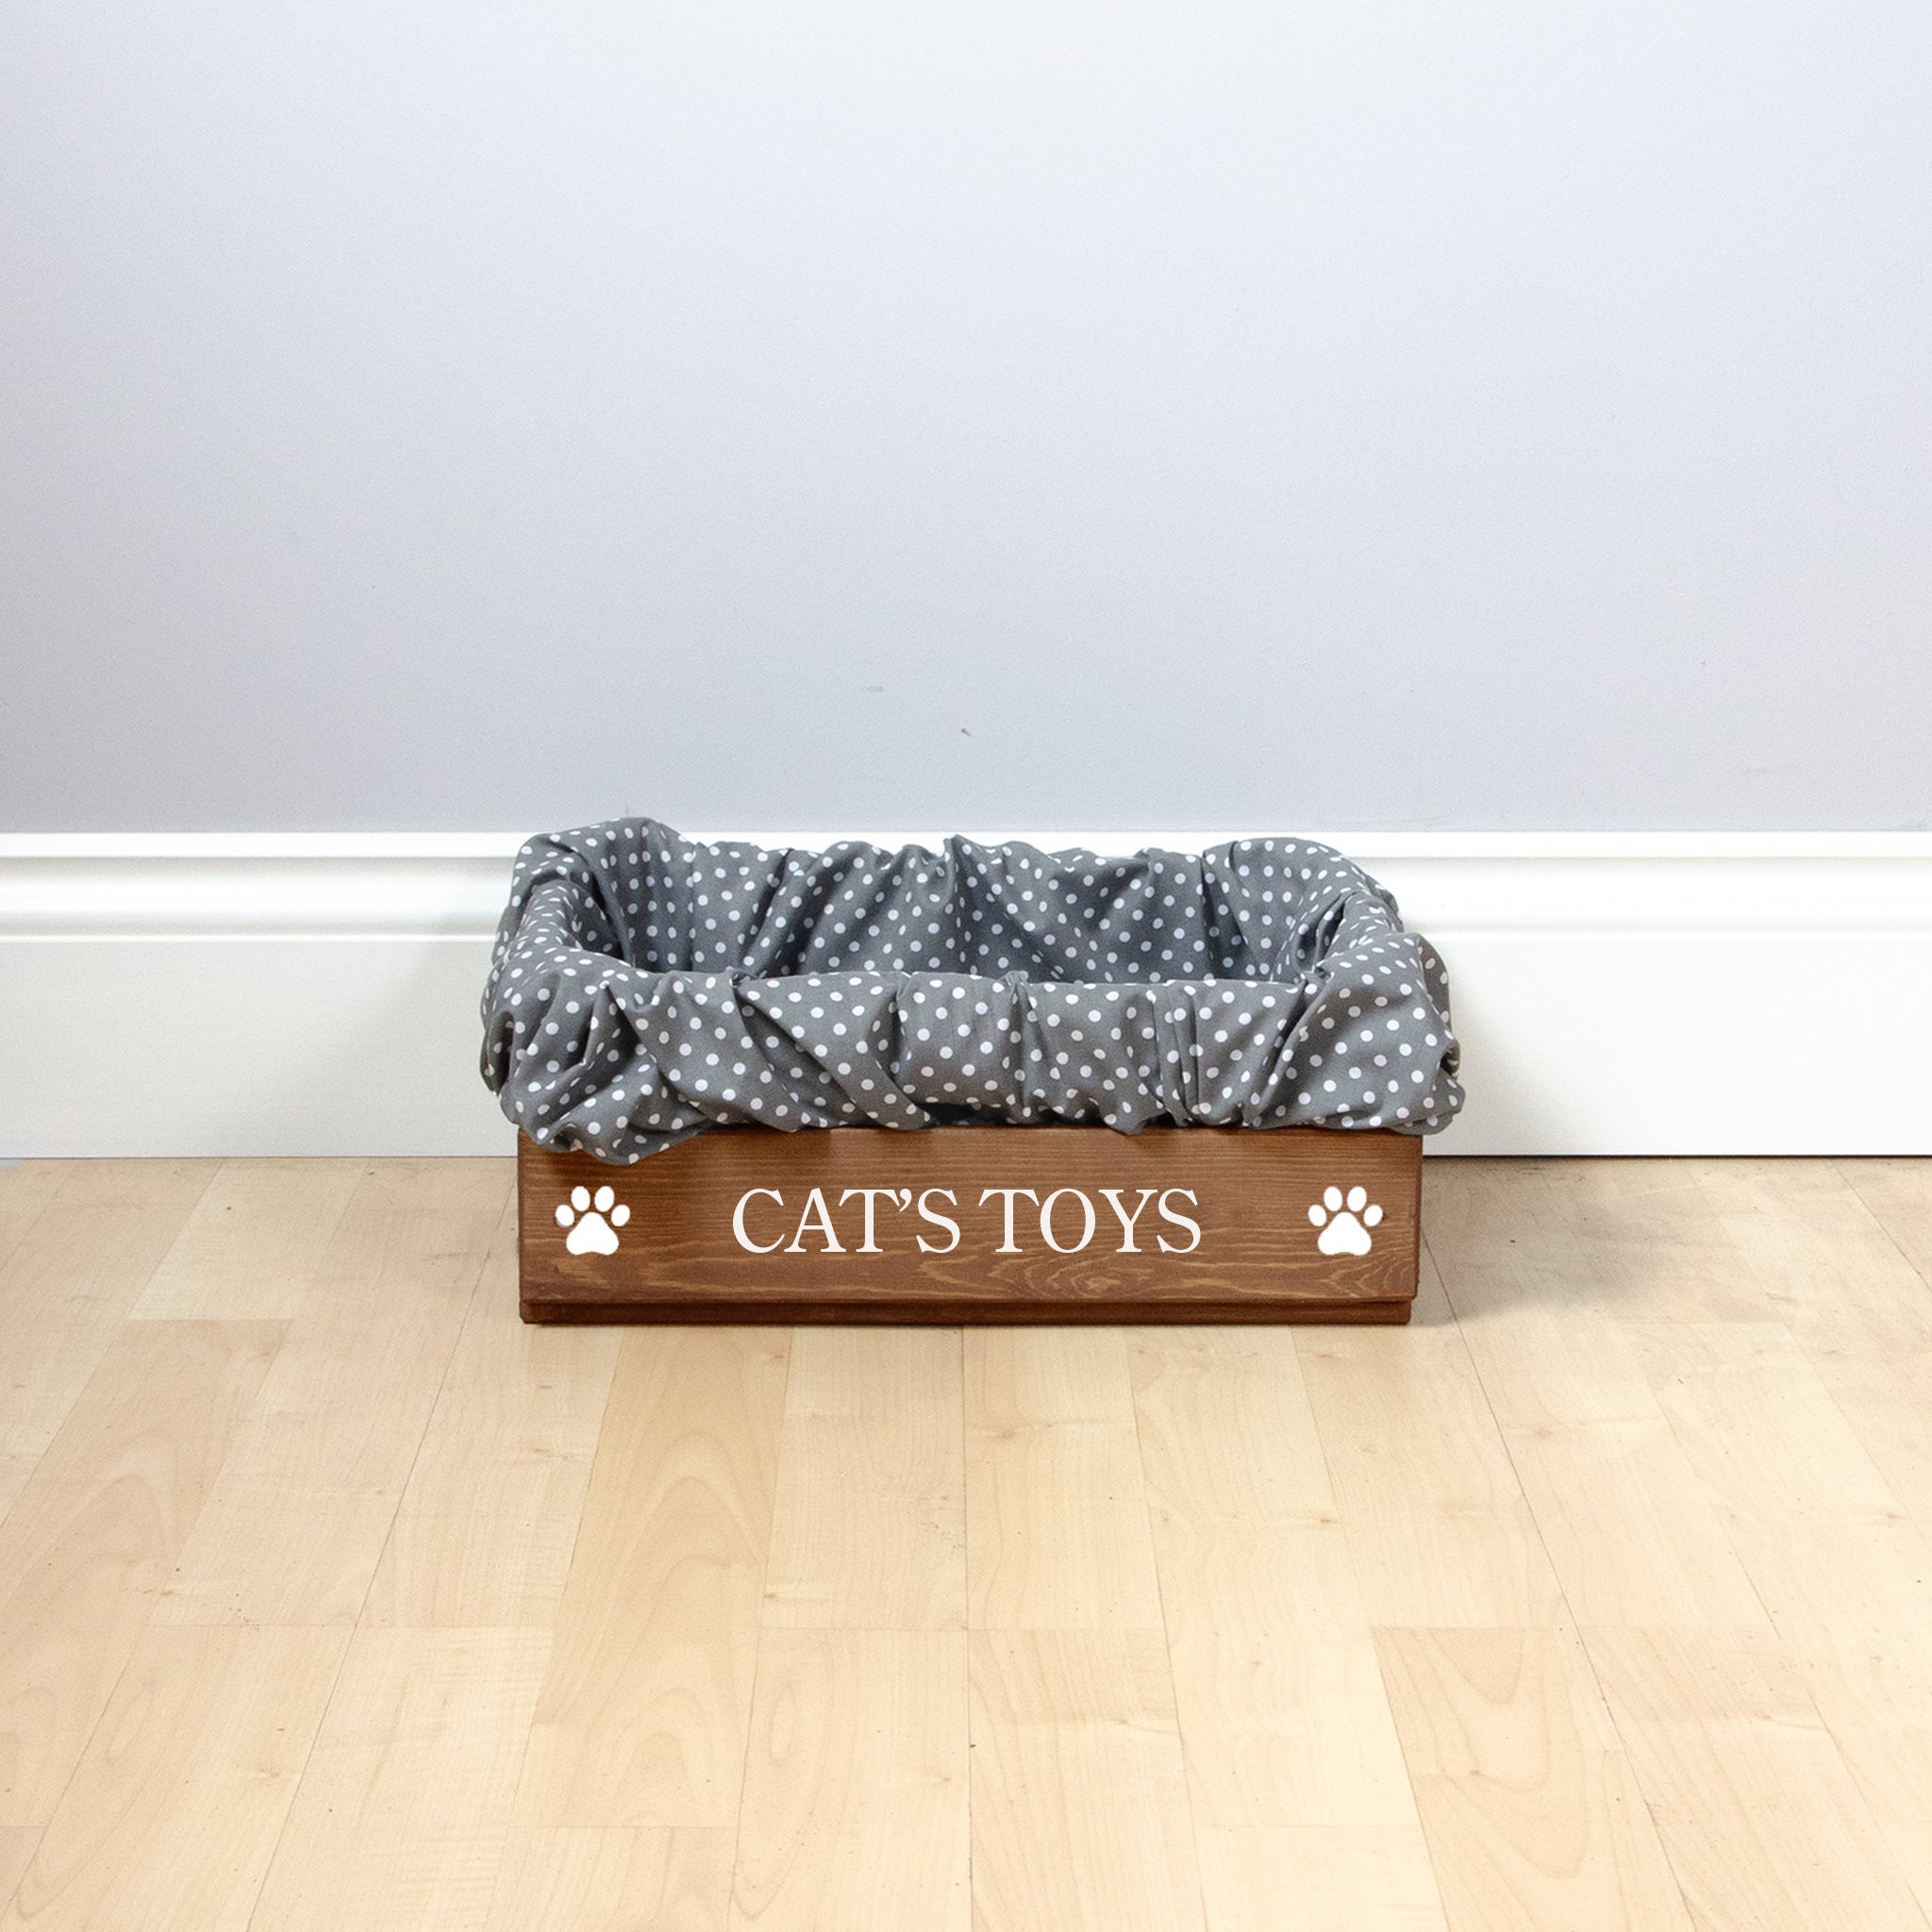 Small Personalised Cat Toy Box with Removable Liner (35 x 25 x 16cm) - Royal Oak